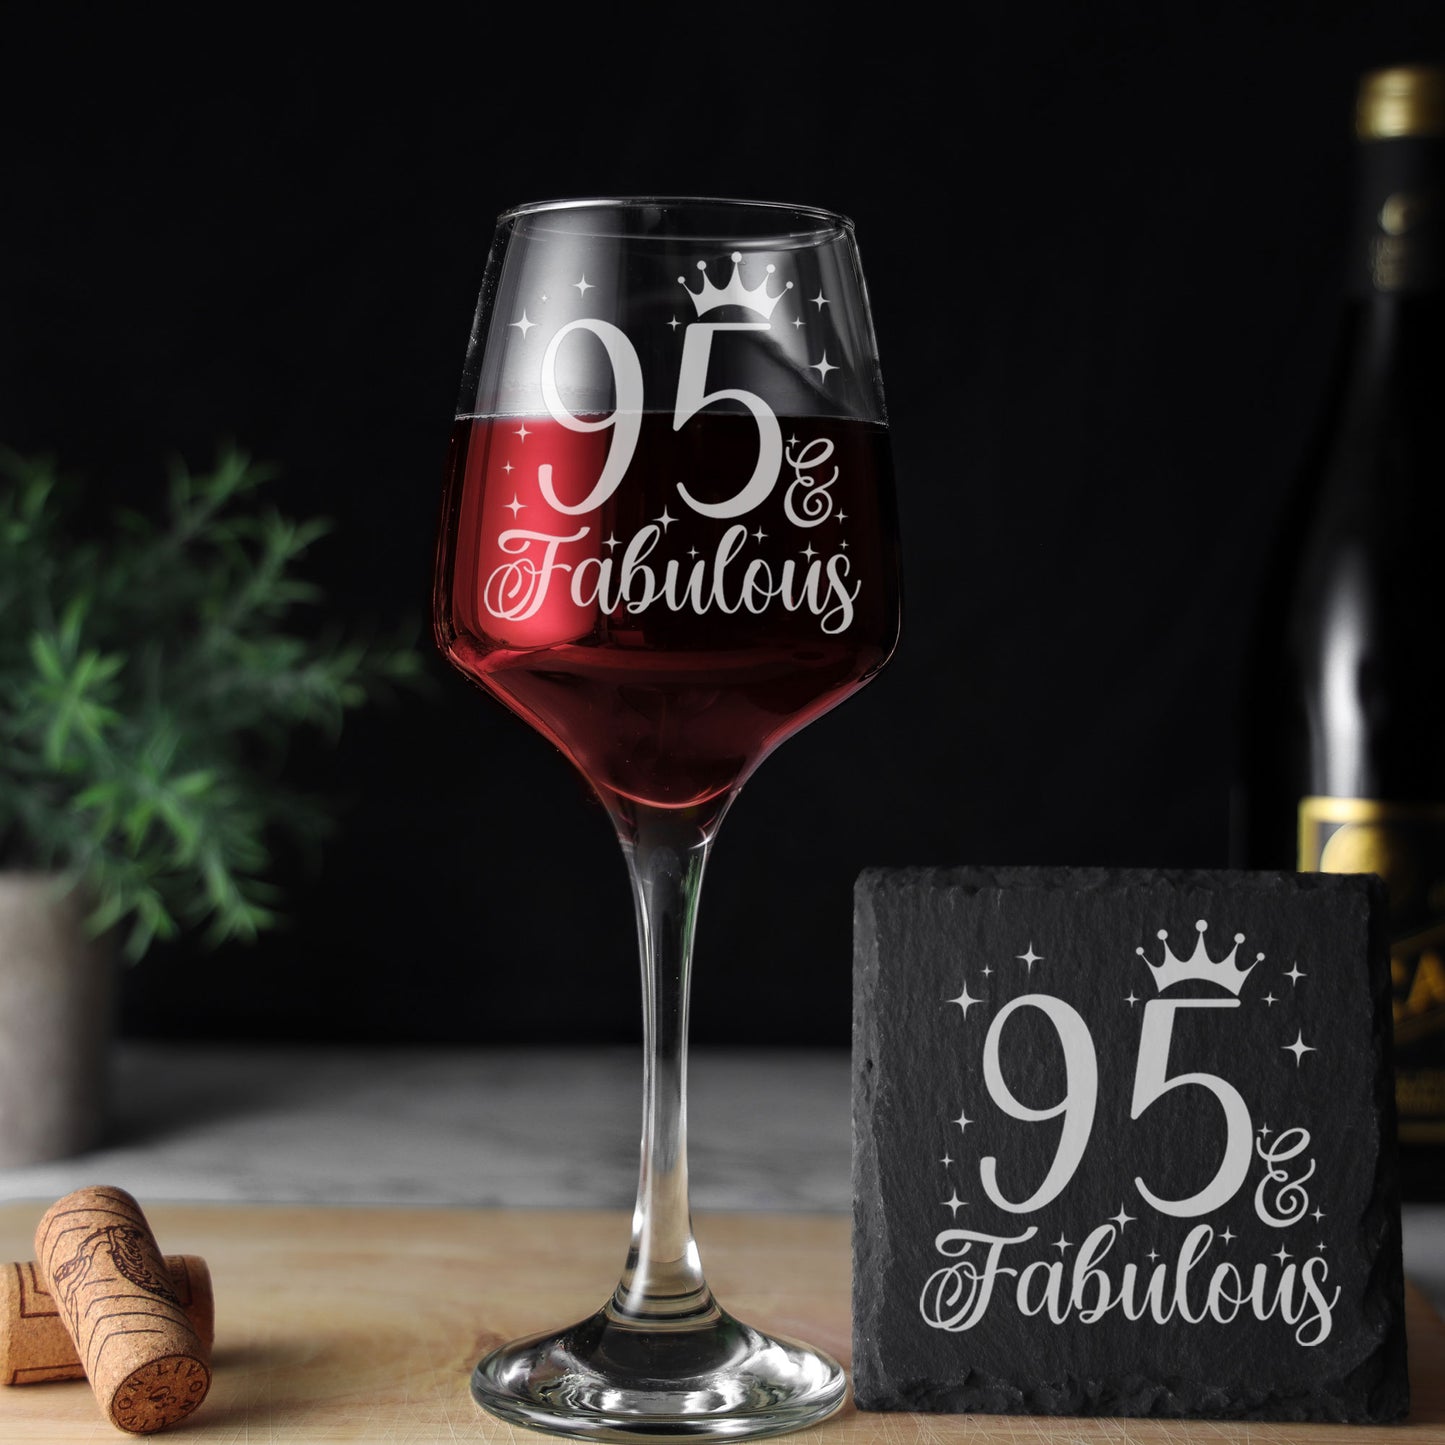 95 & Fabulous 95th Birthday Gift Engraved Wine Glass and/or Coaster Set  - Always Looking Good - Glass & Square Coaster  